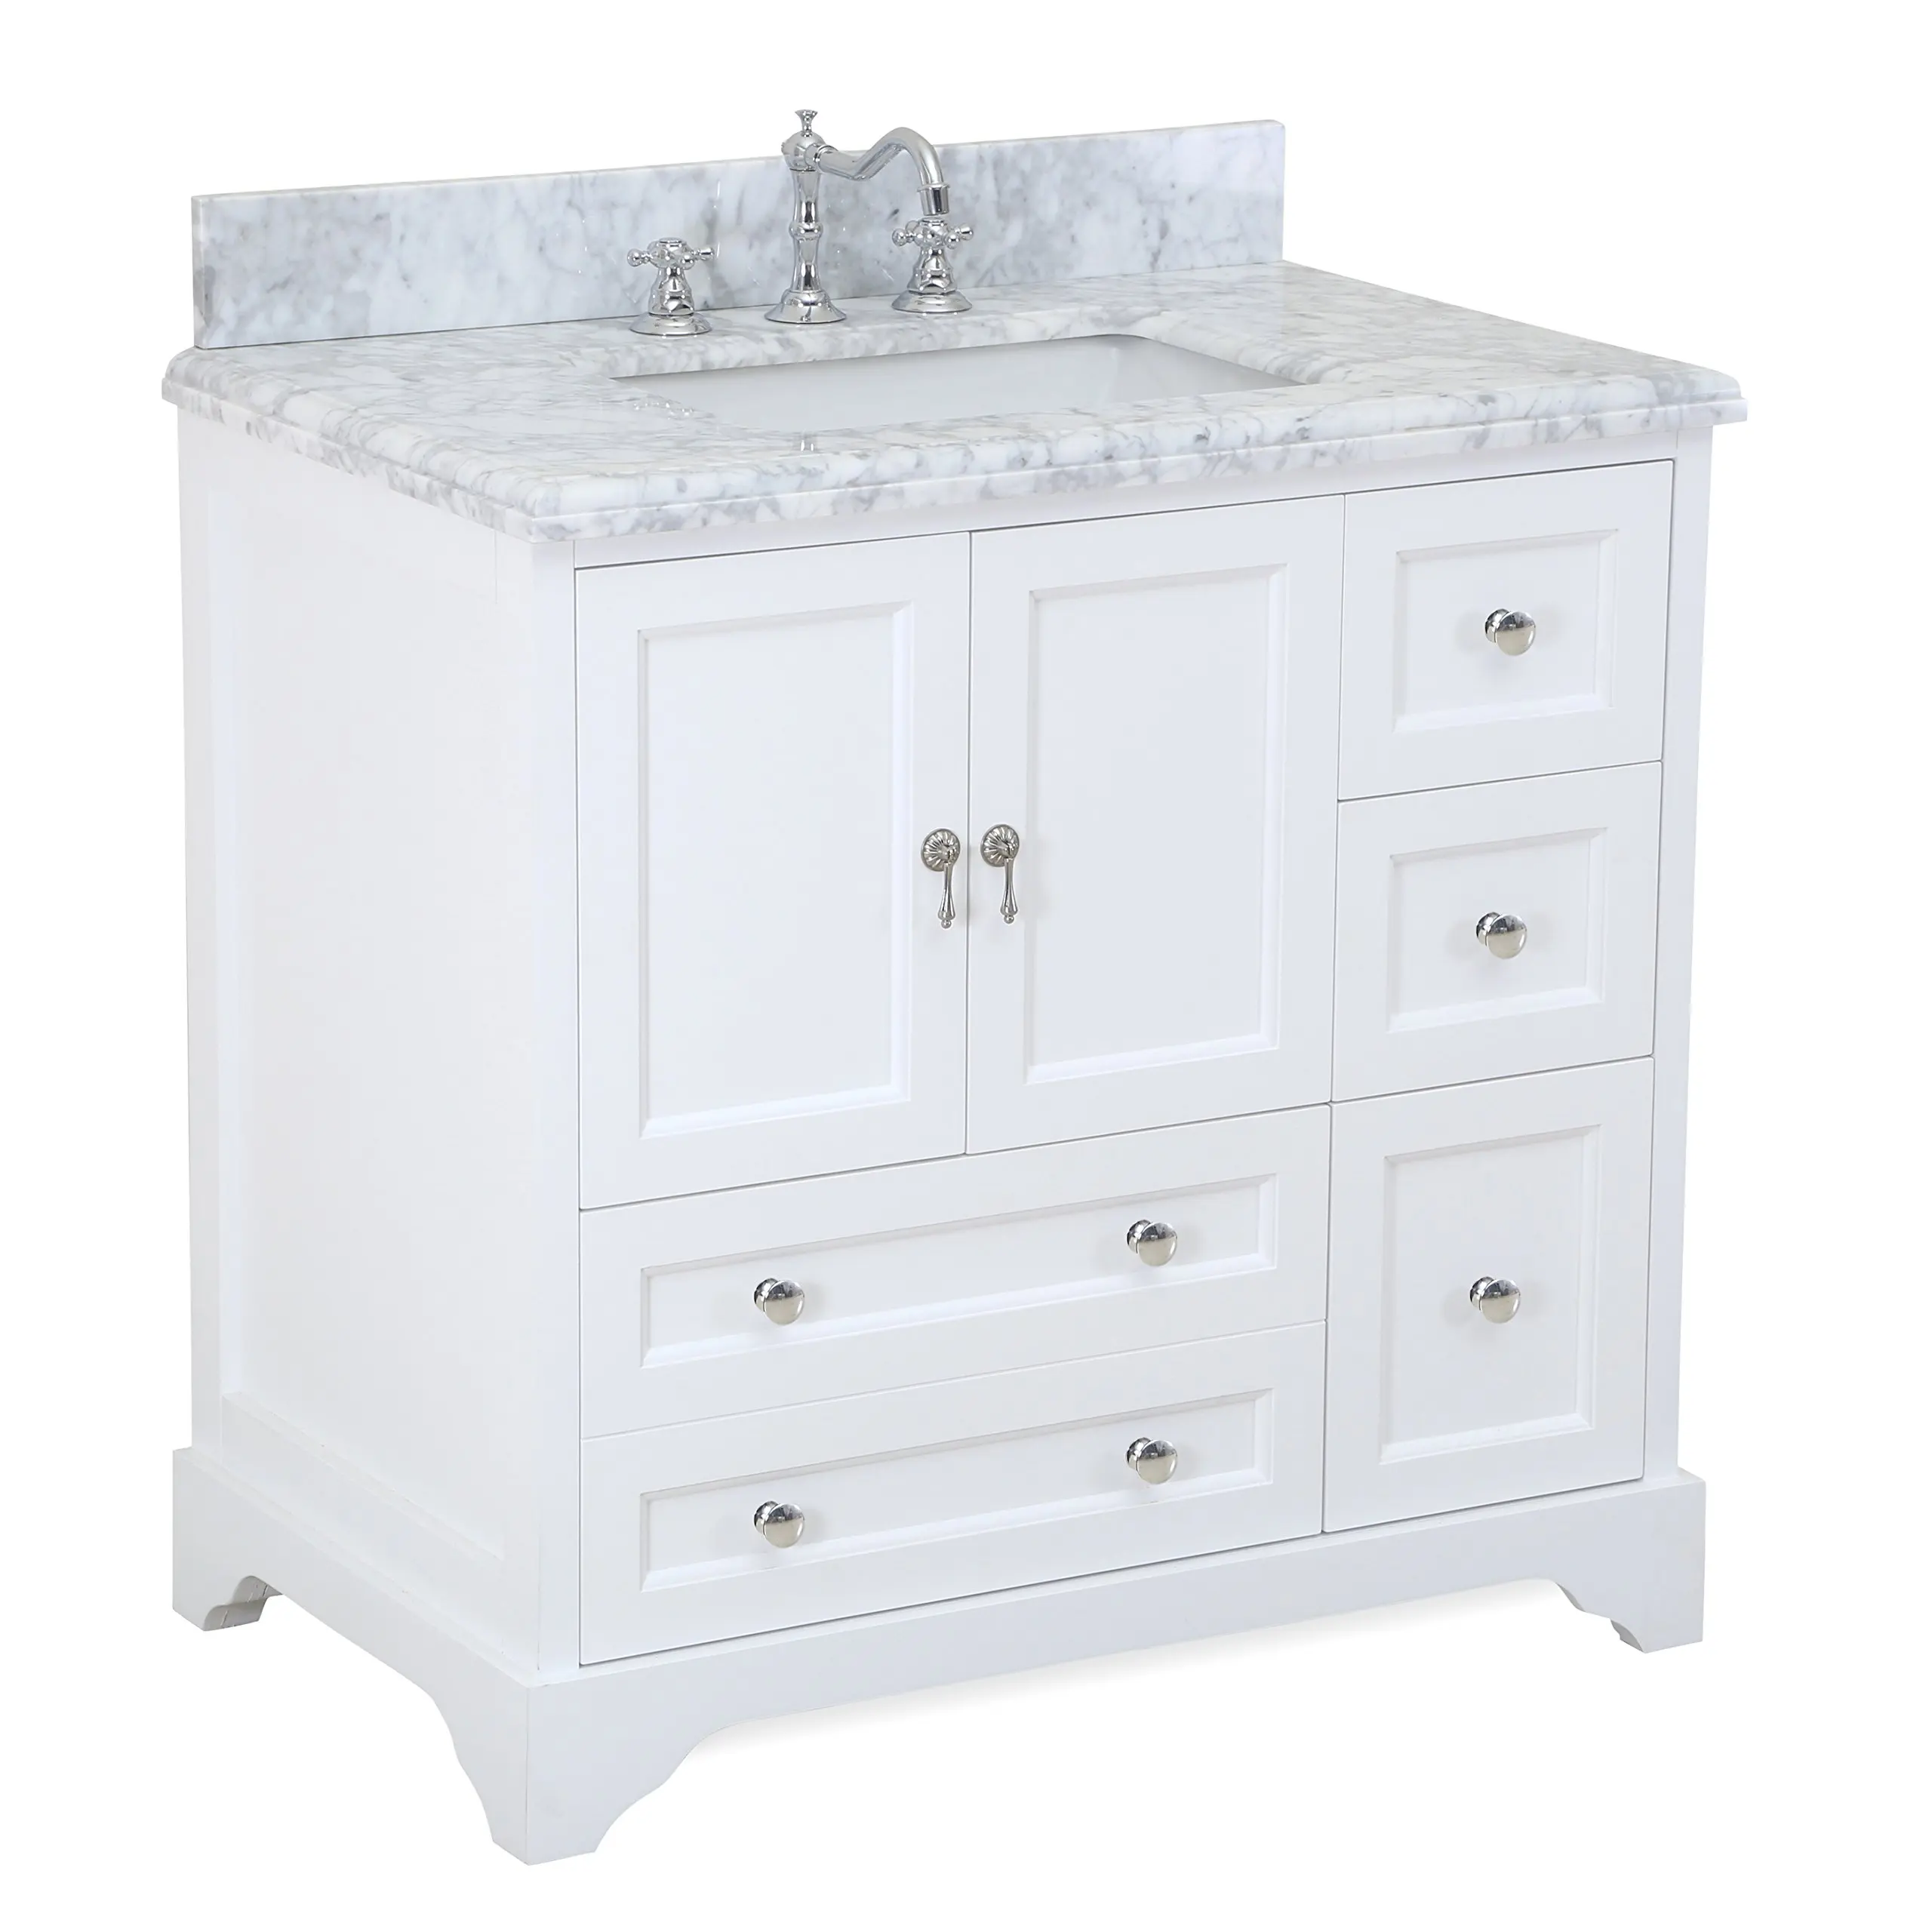 Buy Beverly 36 Inch Bathroom Vanity Carrara White Includes An Italian Carrara Marble Countertop A White Cabinet And A Ceramic Sink In Cheap Price On Alibaba Com